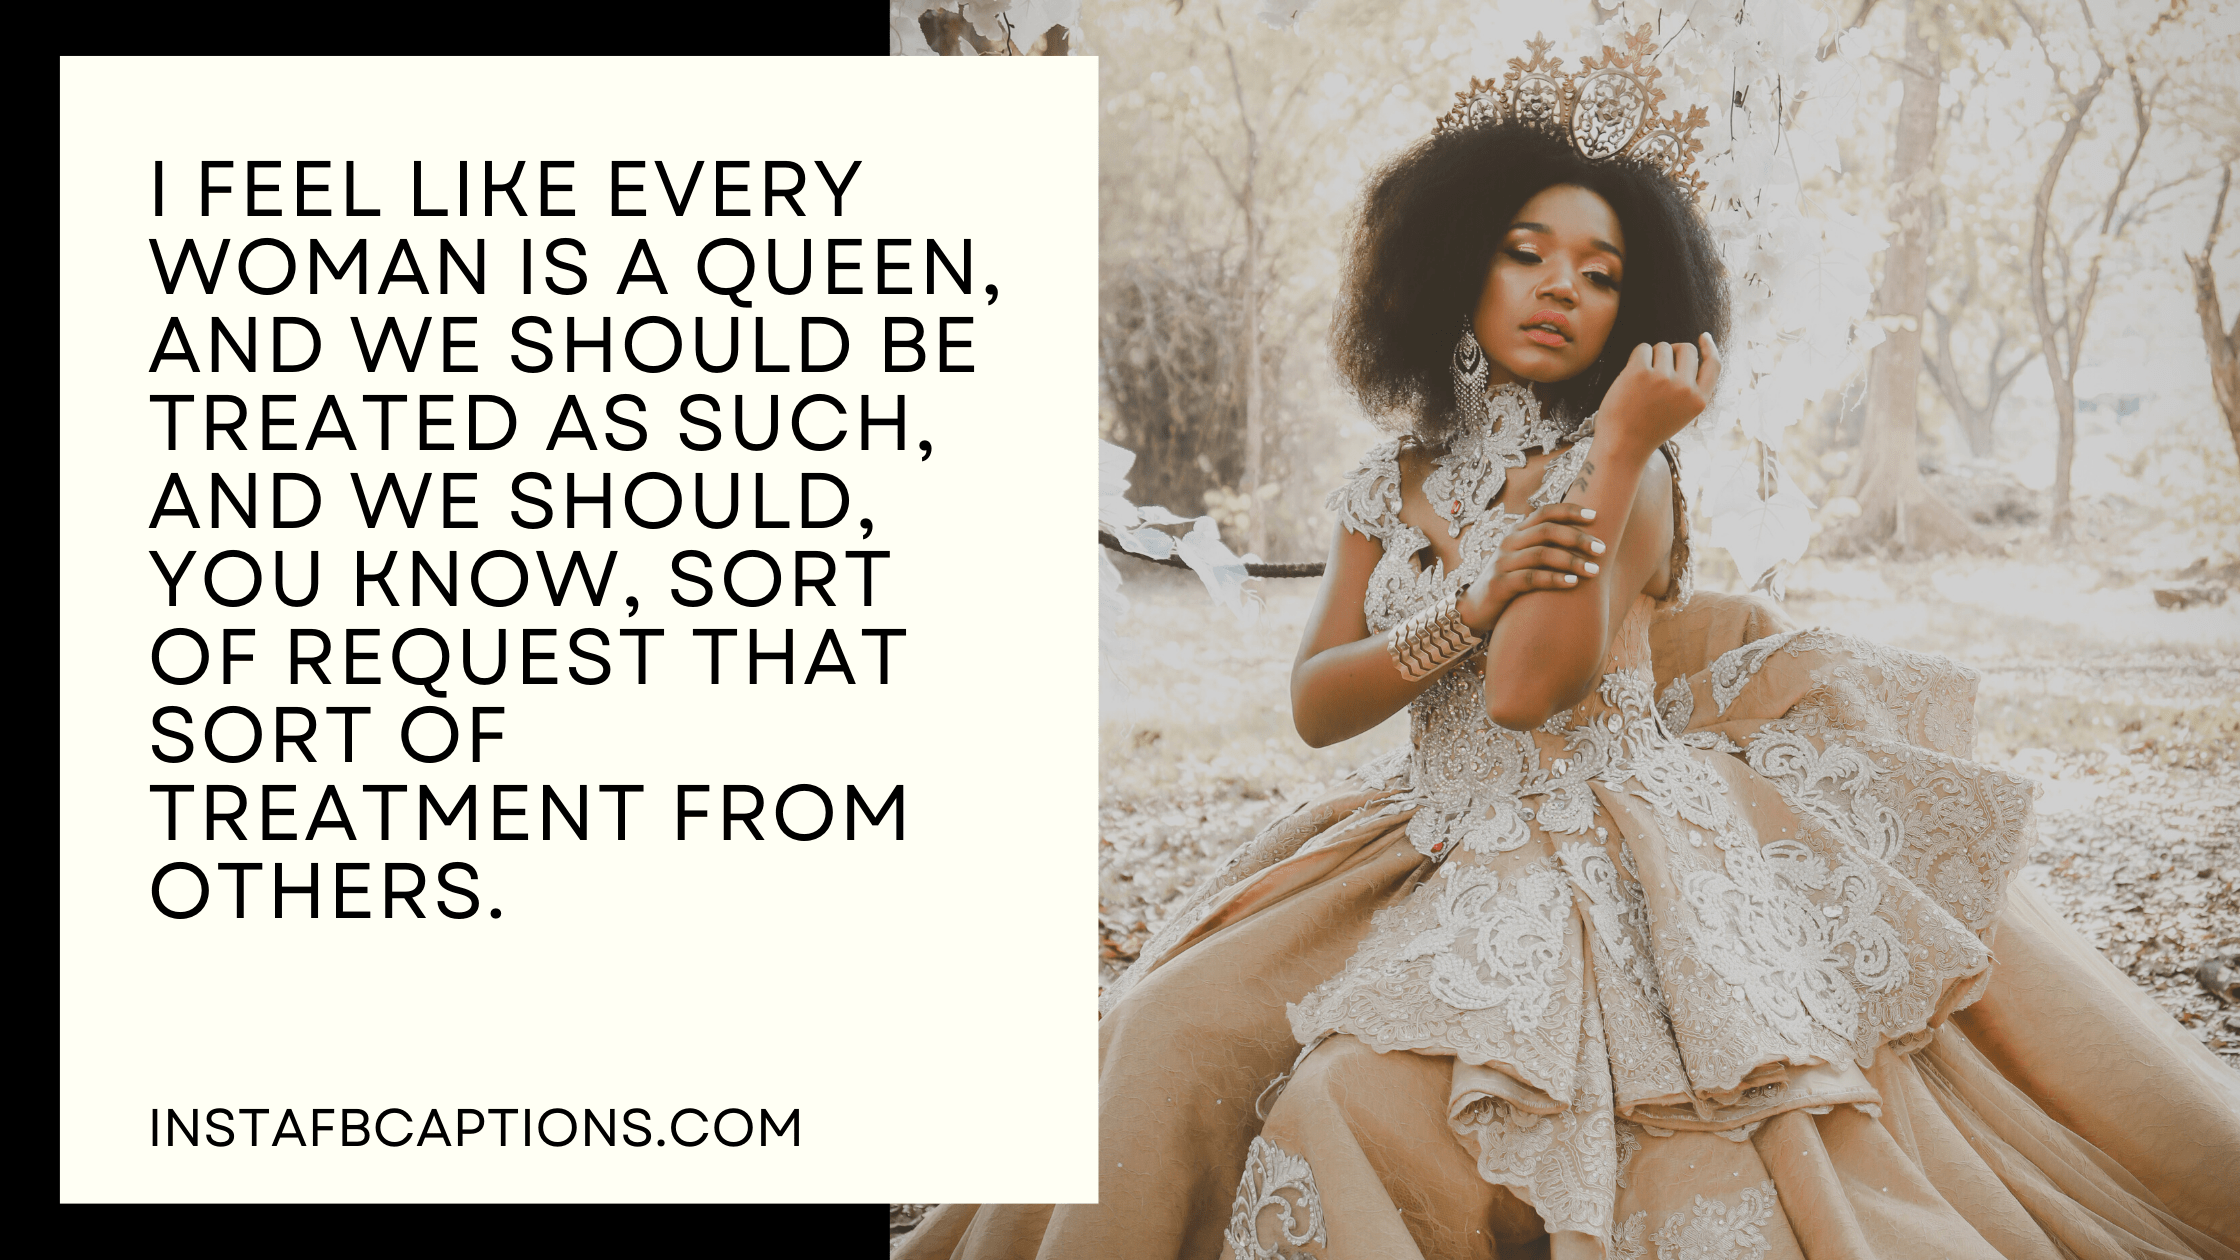 I feel like every woman is a queen, and we should be treated as such, and we should, you know, sort of request that sort of treatment from others. queen captions - Attitude Queen Captions  - 100+ Queen Captions And Quotes For Instagram in 2022